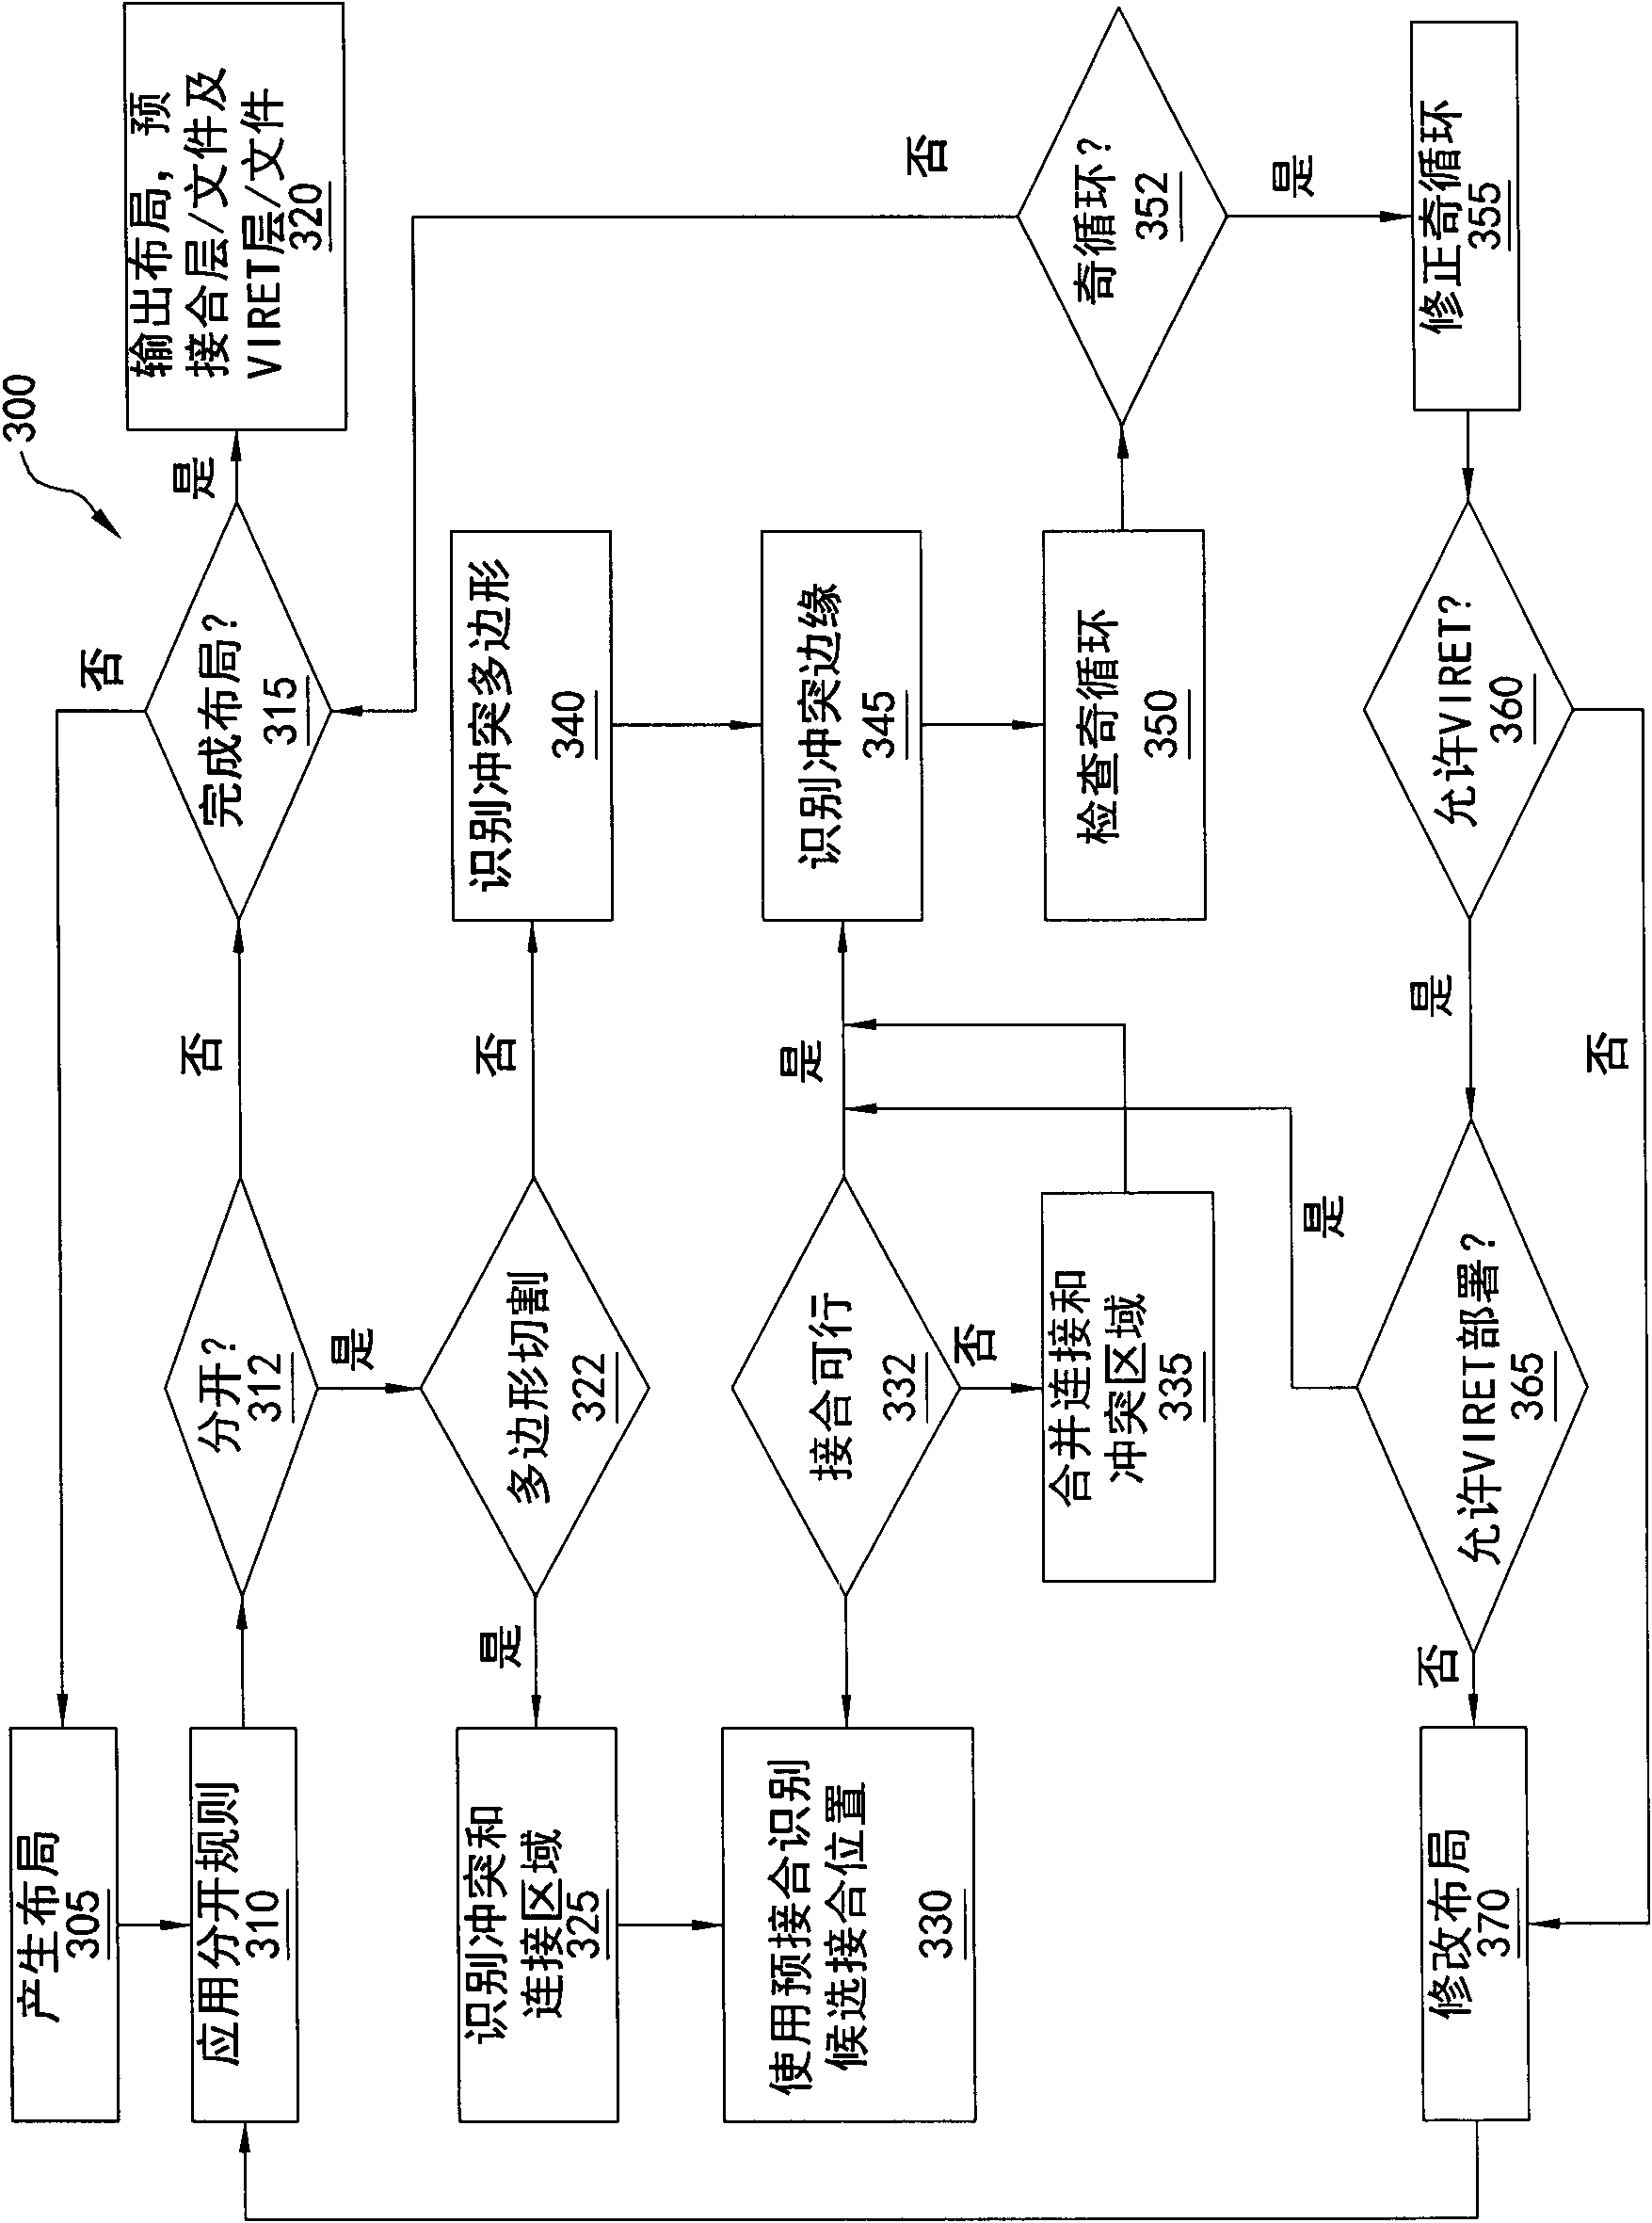 Method of decomposing integrated circuit layout and computer readable media